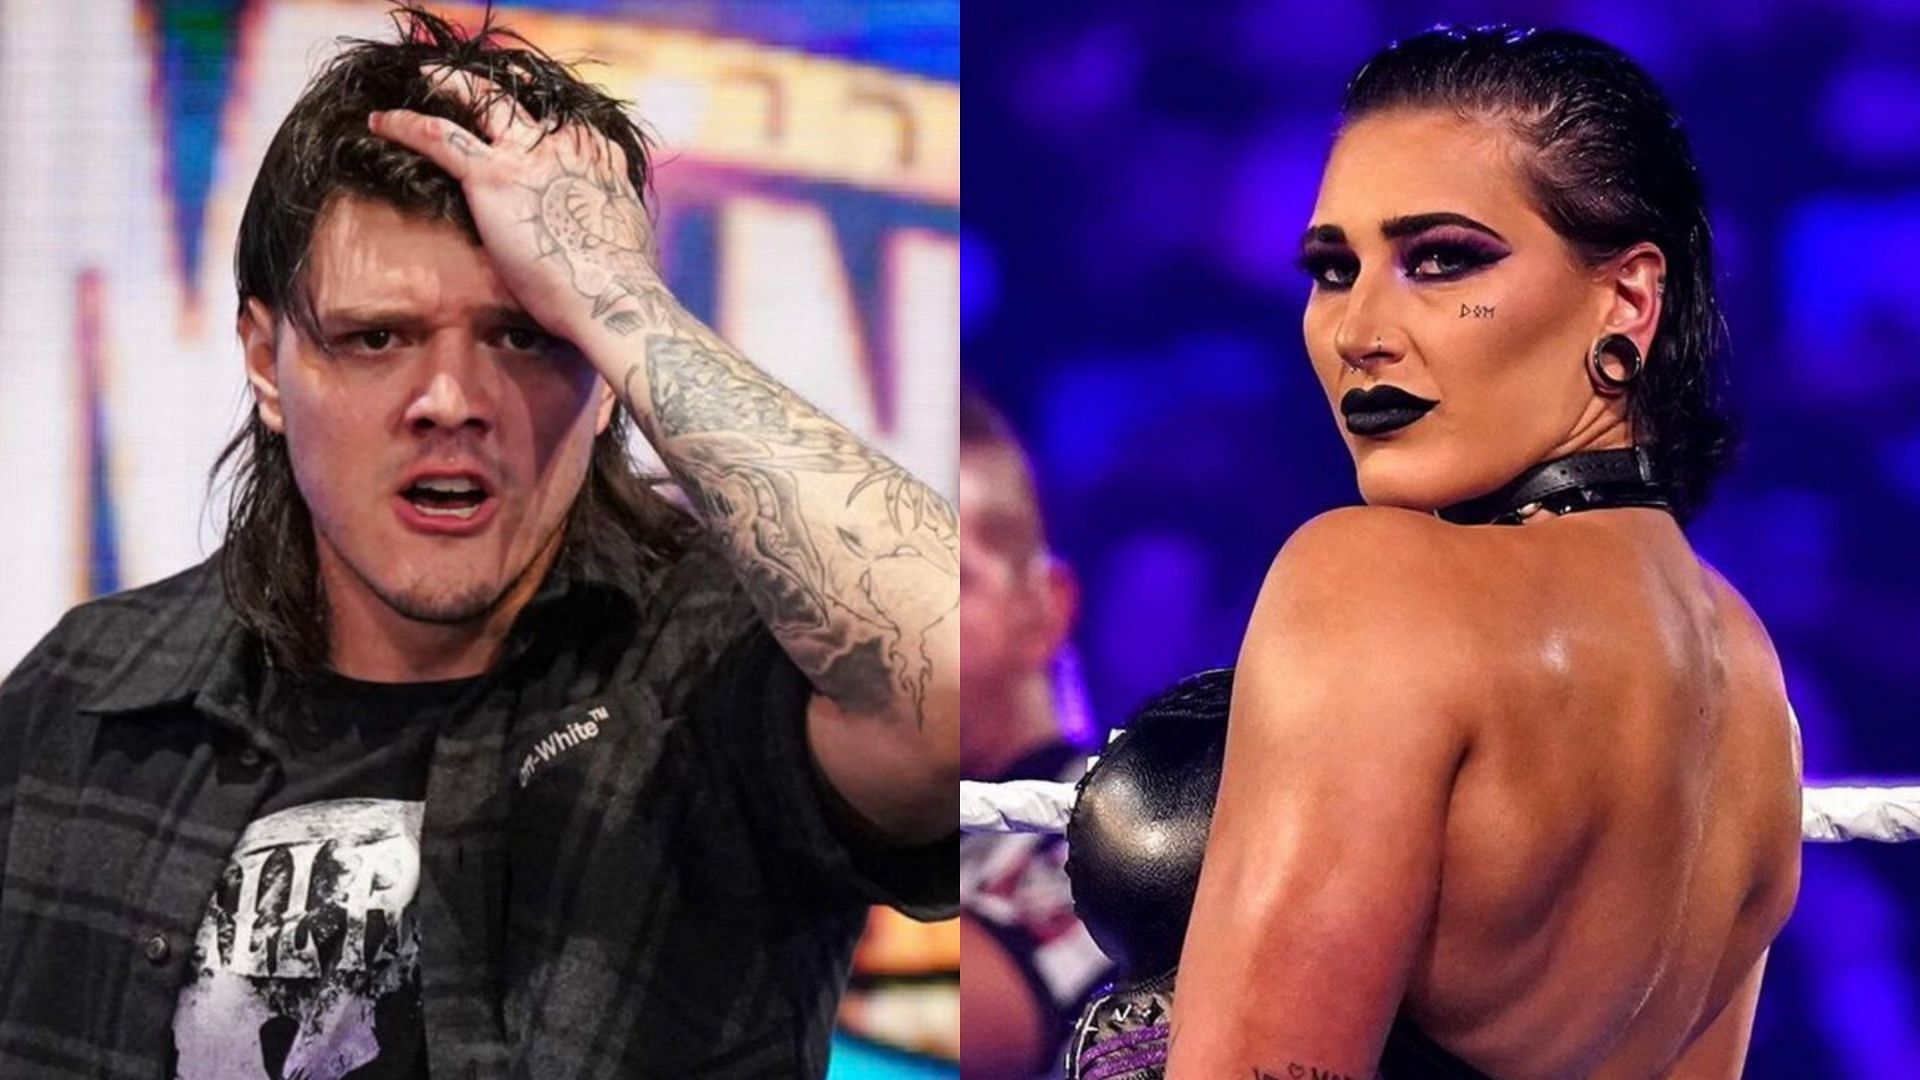 Dominik Mysterio and Rhea Ripley are not on the WWE SummerSlam card